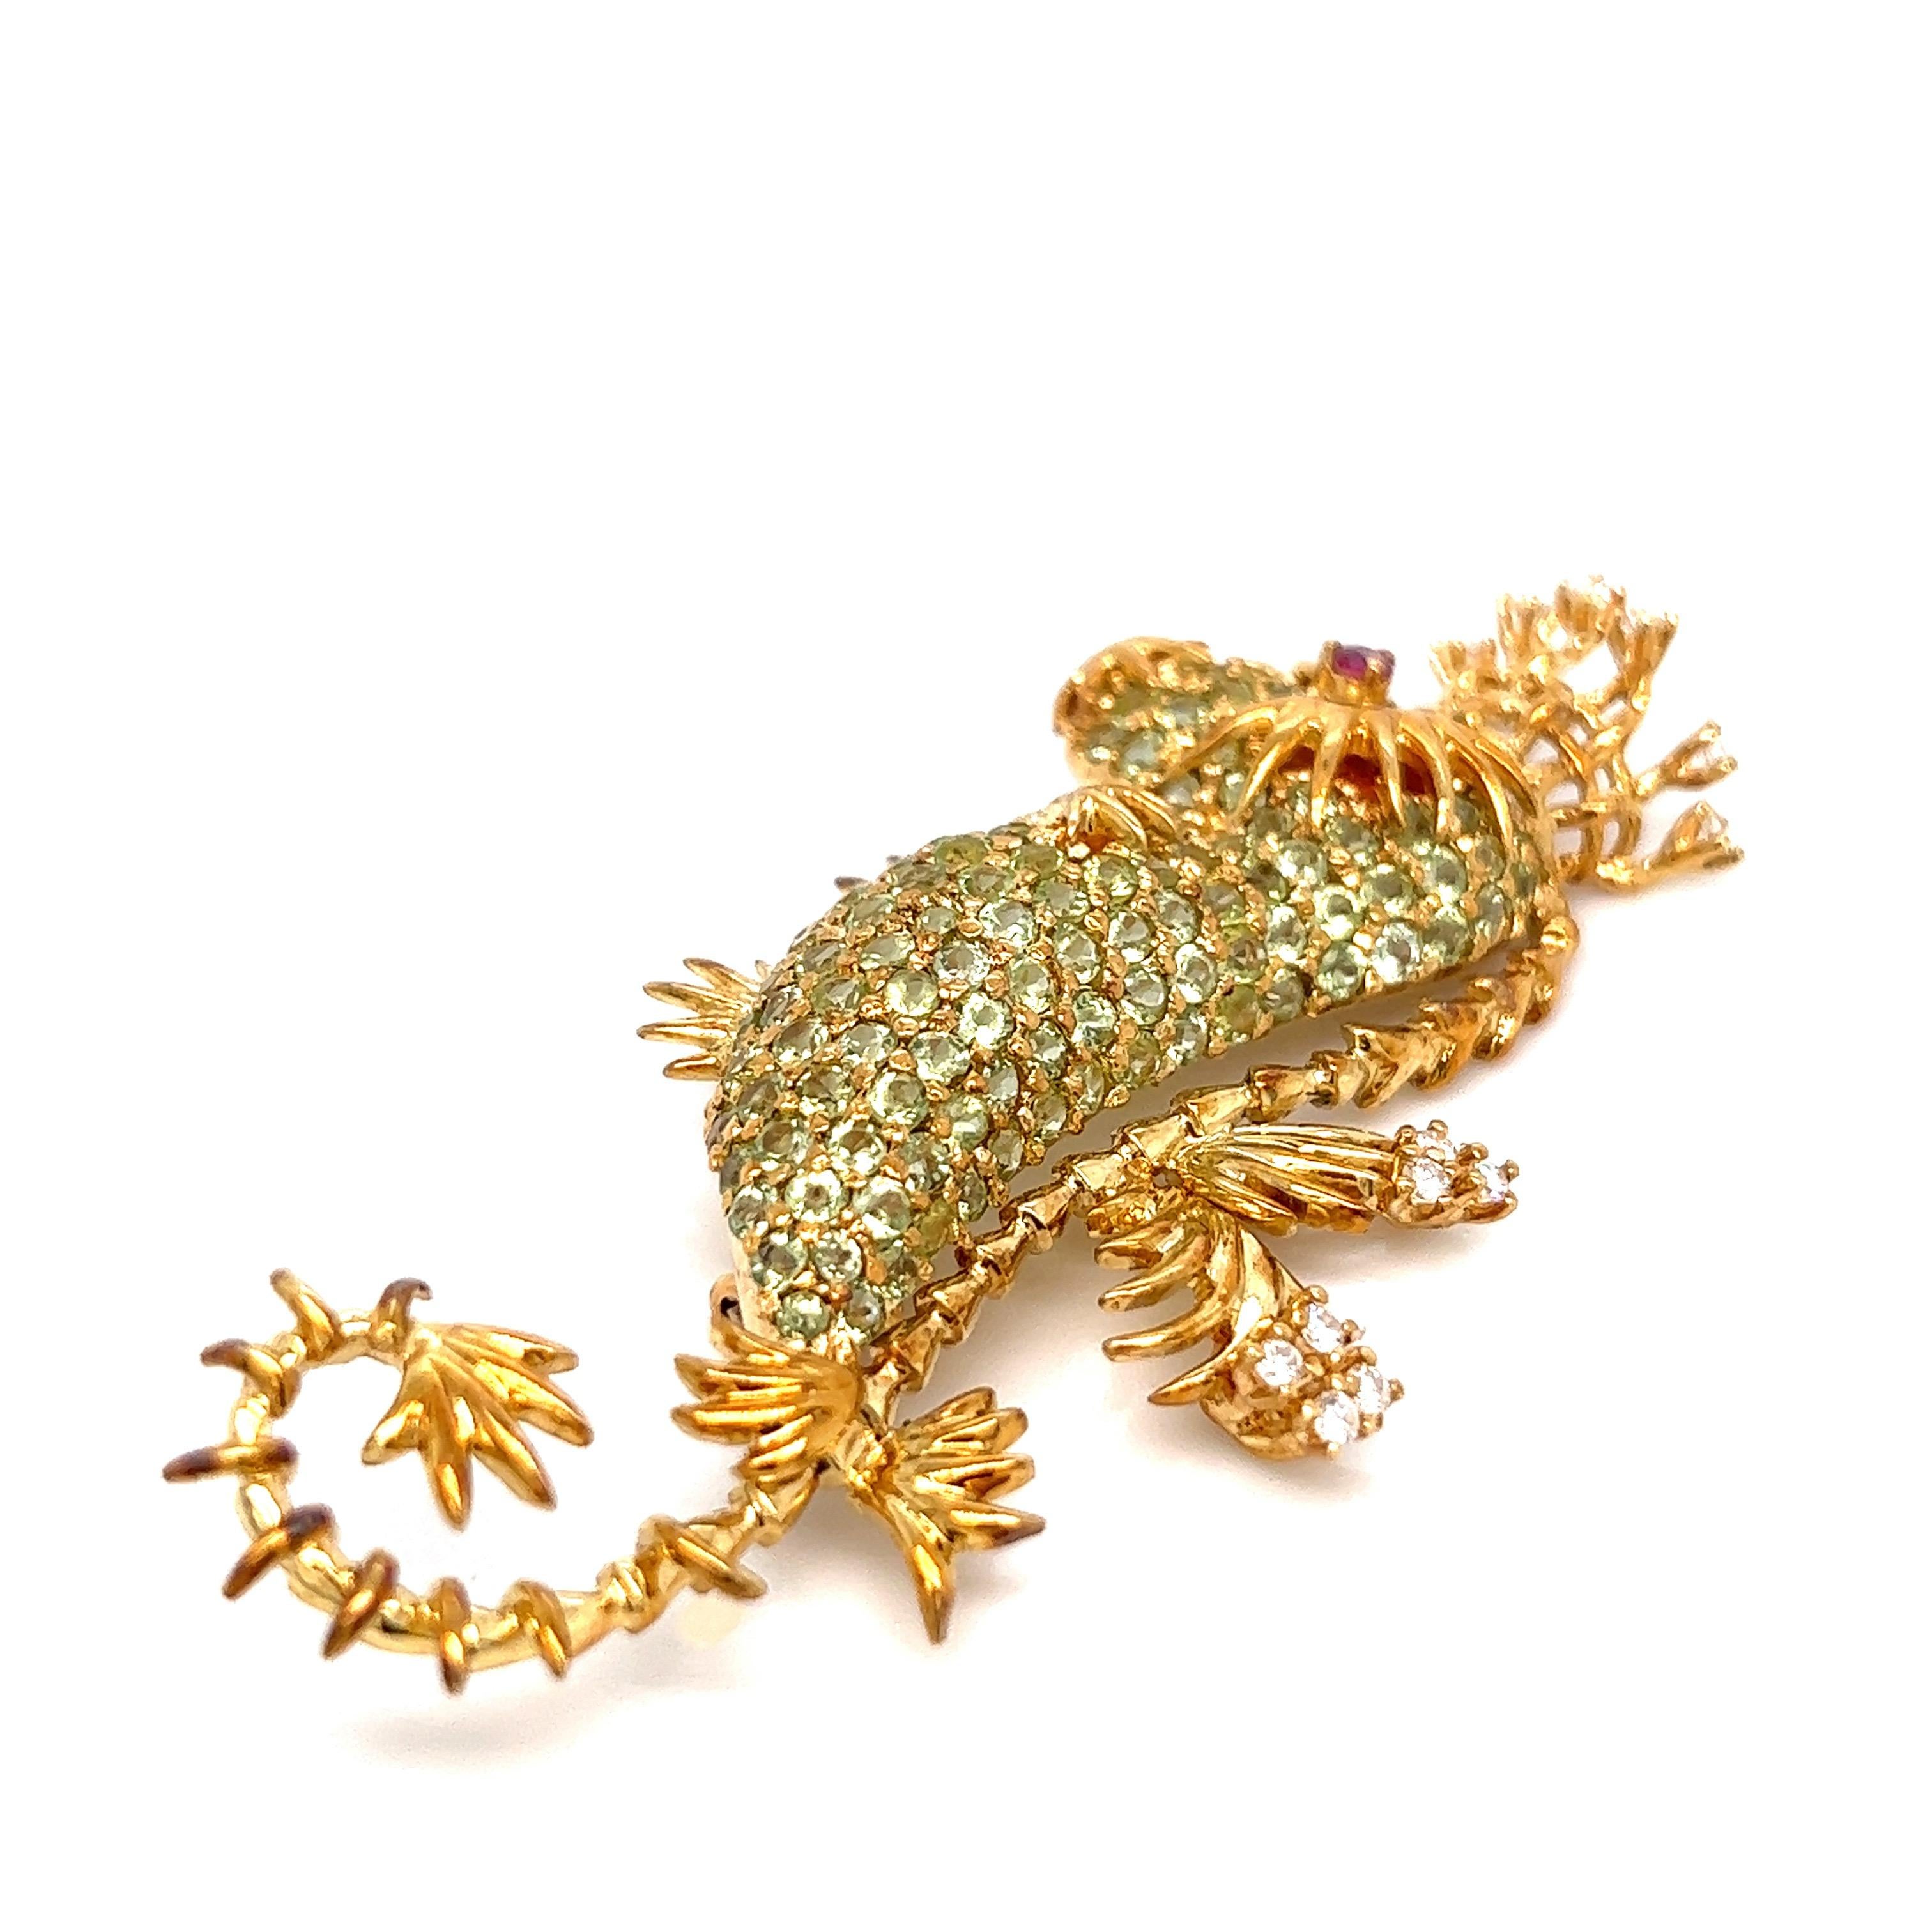 Seahorse Peridot Diamond Gold Brooch In Excellent Condition For Sale In New York, NY